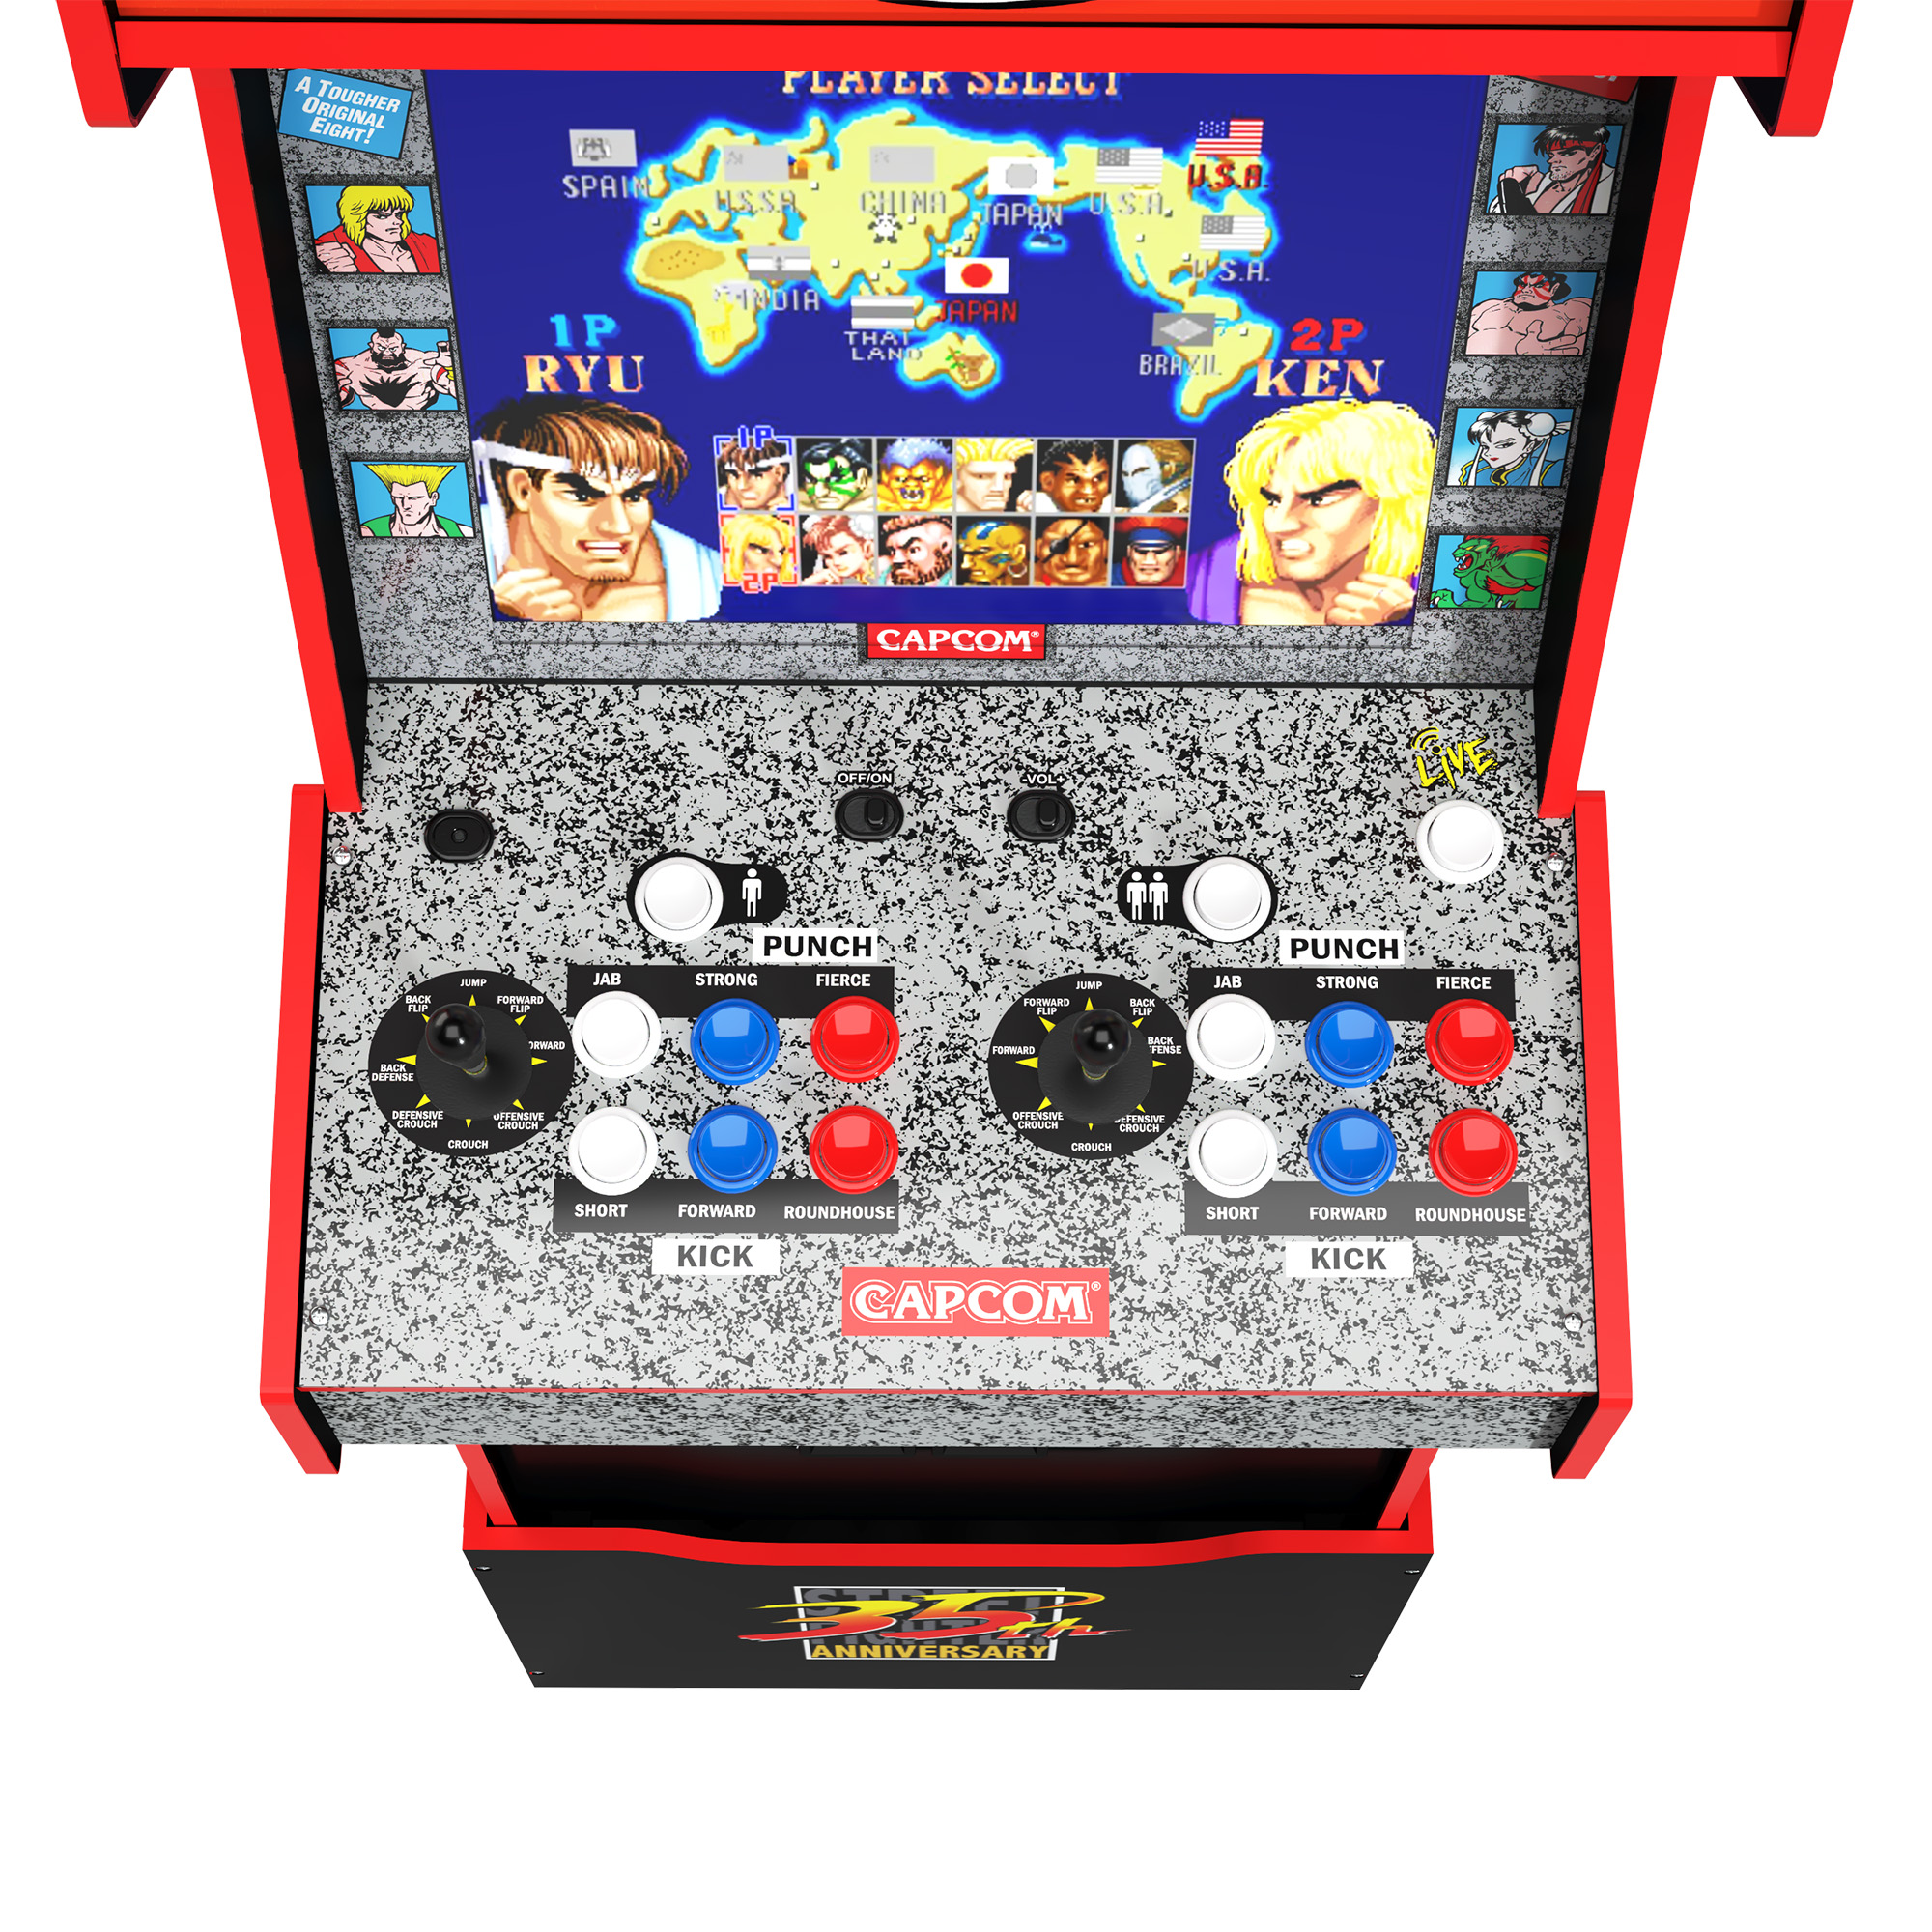 Arcade1UP - 14 Games in 1, Street Fighter II Turbo: Hyper Fighting, Legacy Video Game Arcade with Riser and Wi-Fi Live - image 3 of 7